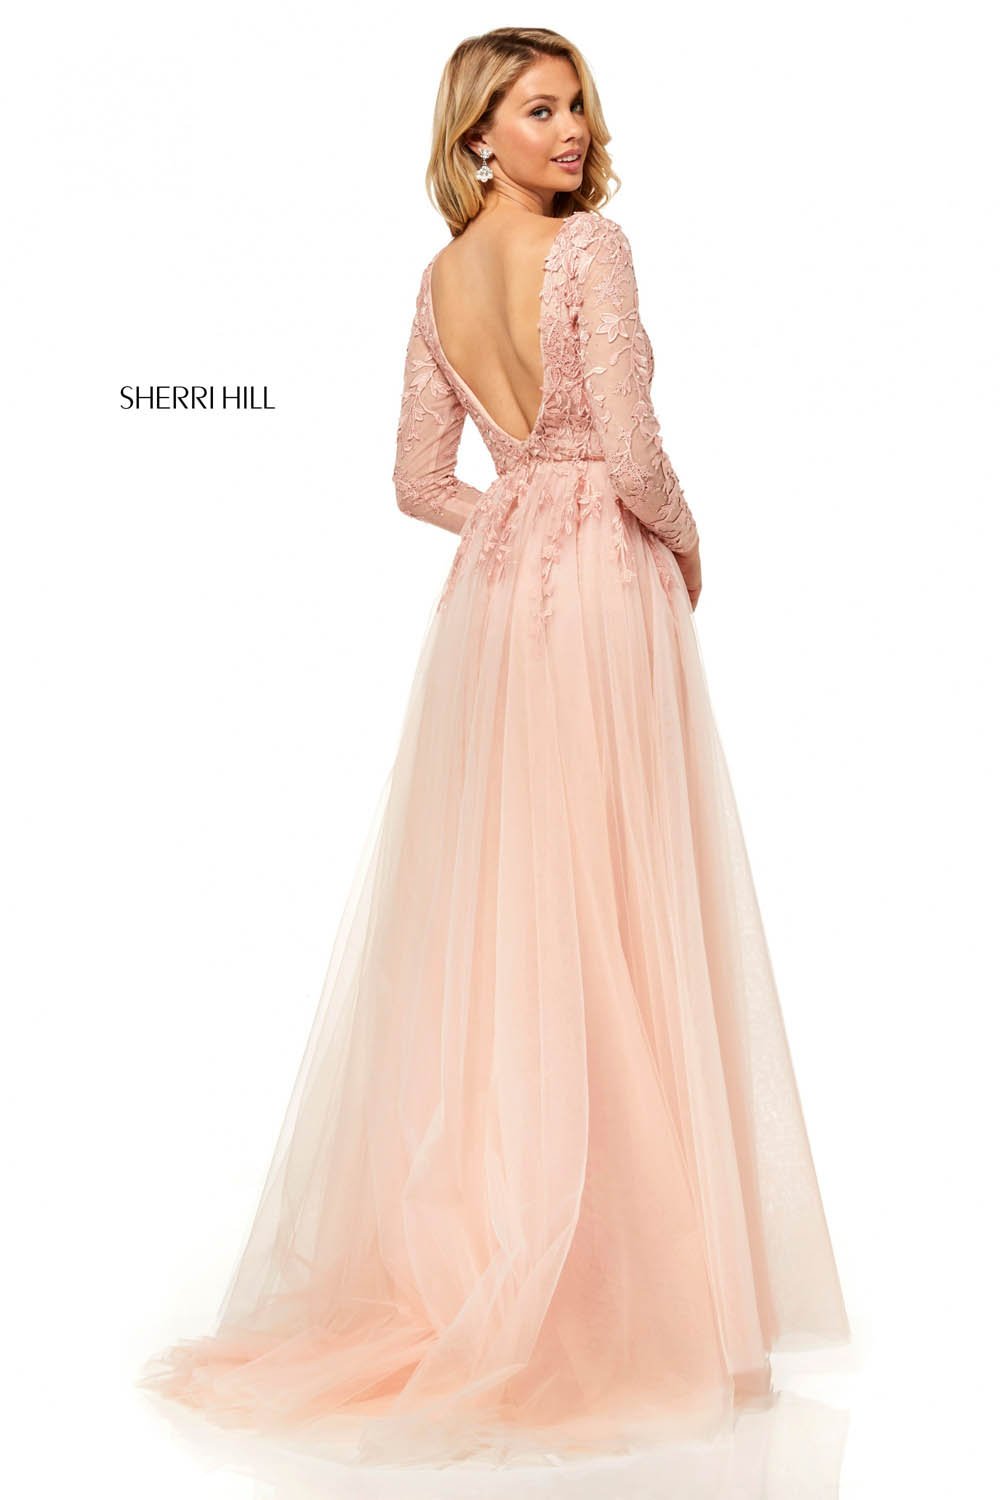 Sherri Hill 52476 dress images in these colors: Blush, Ivory, Gold, Black.